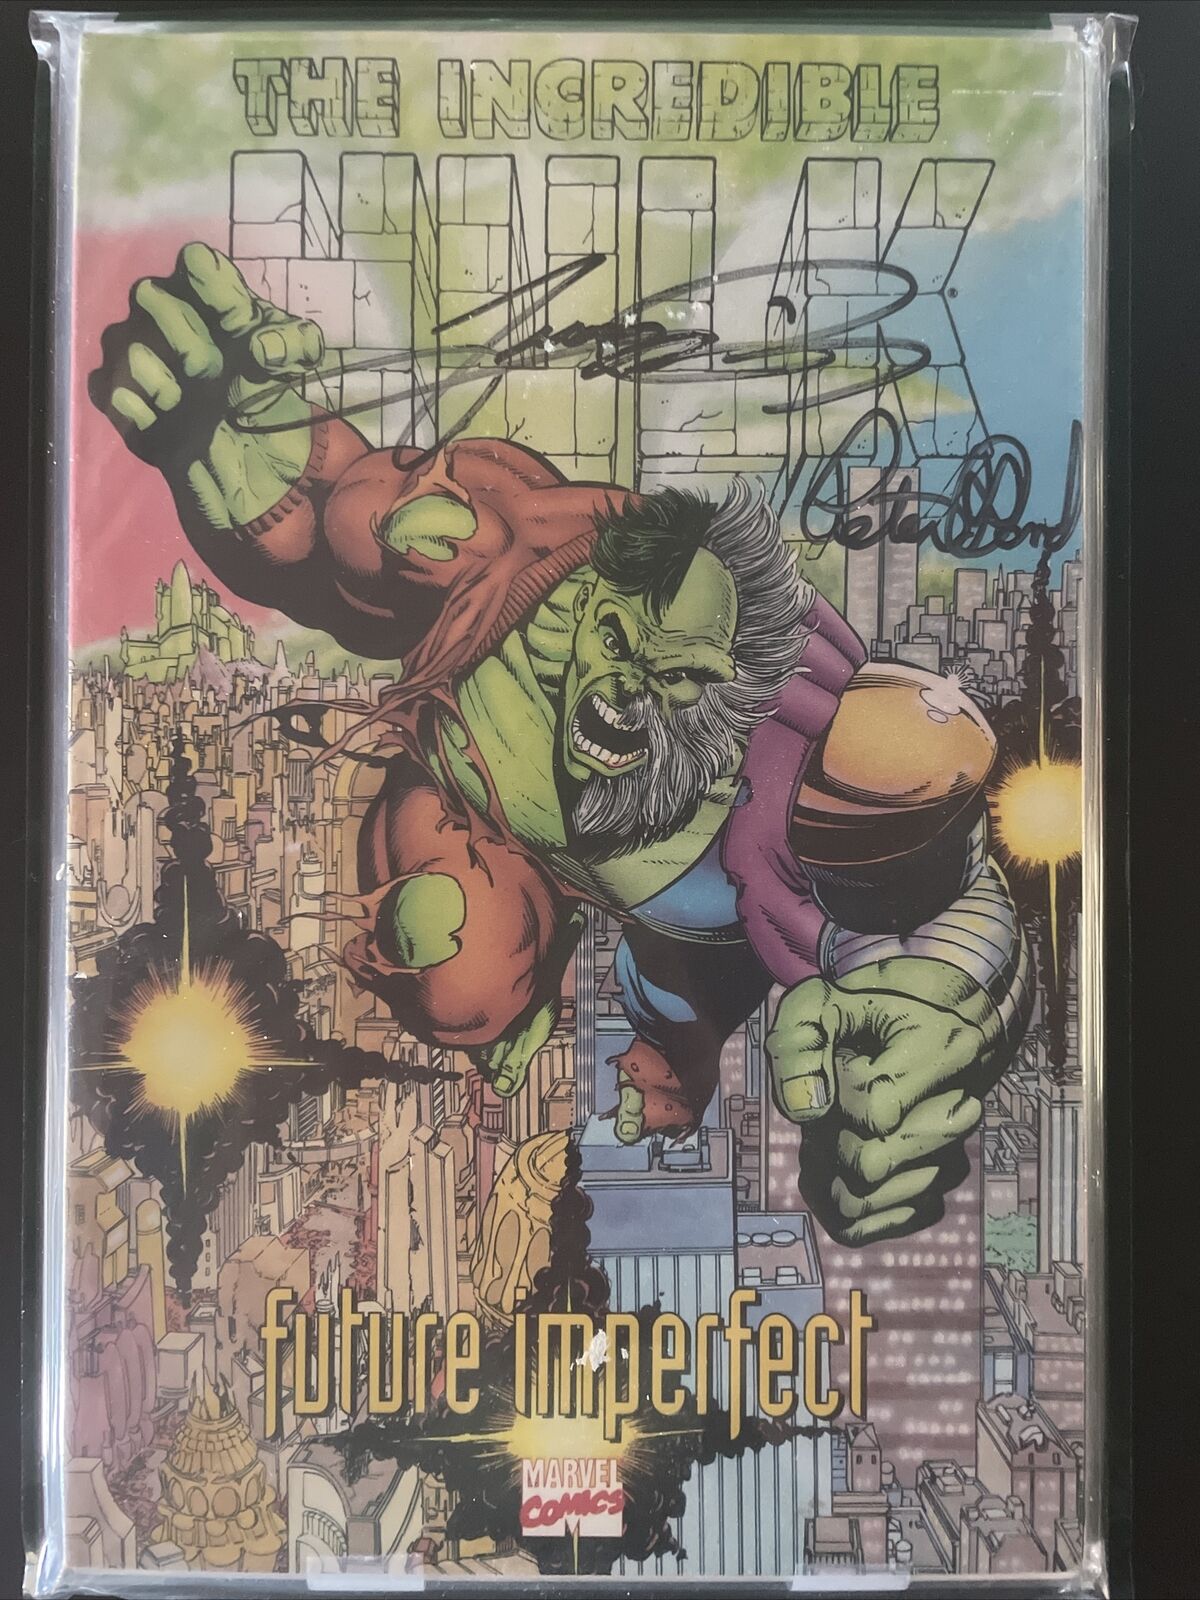 Incredible Hulk Future Imperfect (Marvel) SIGNED by George Perez & Peter David